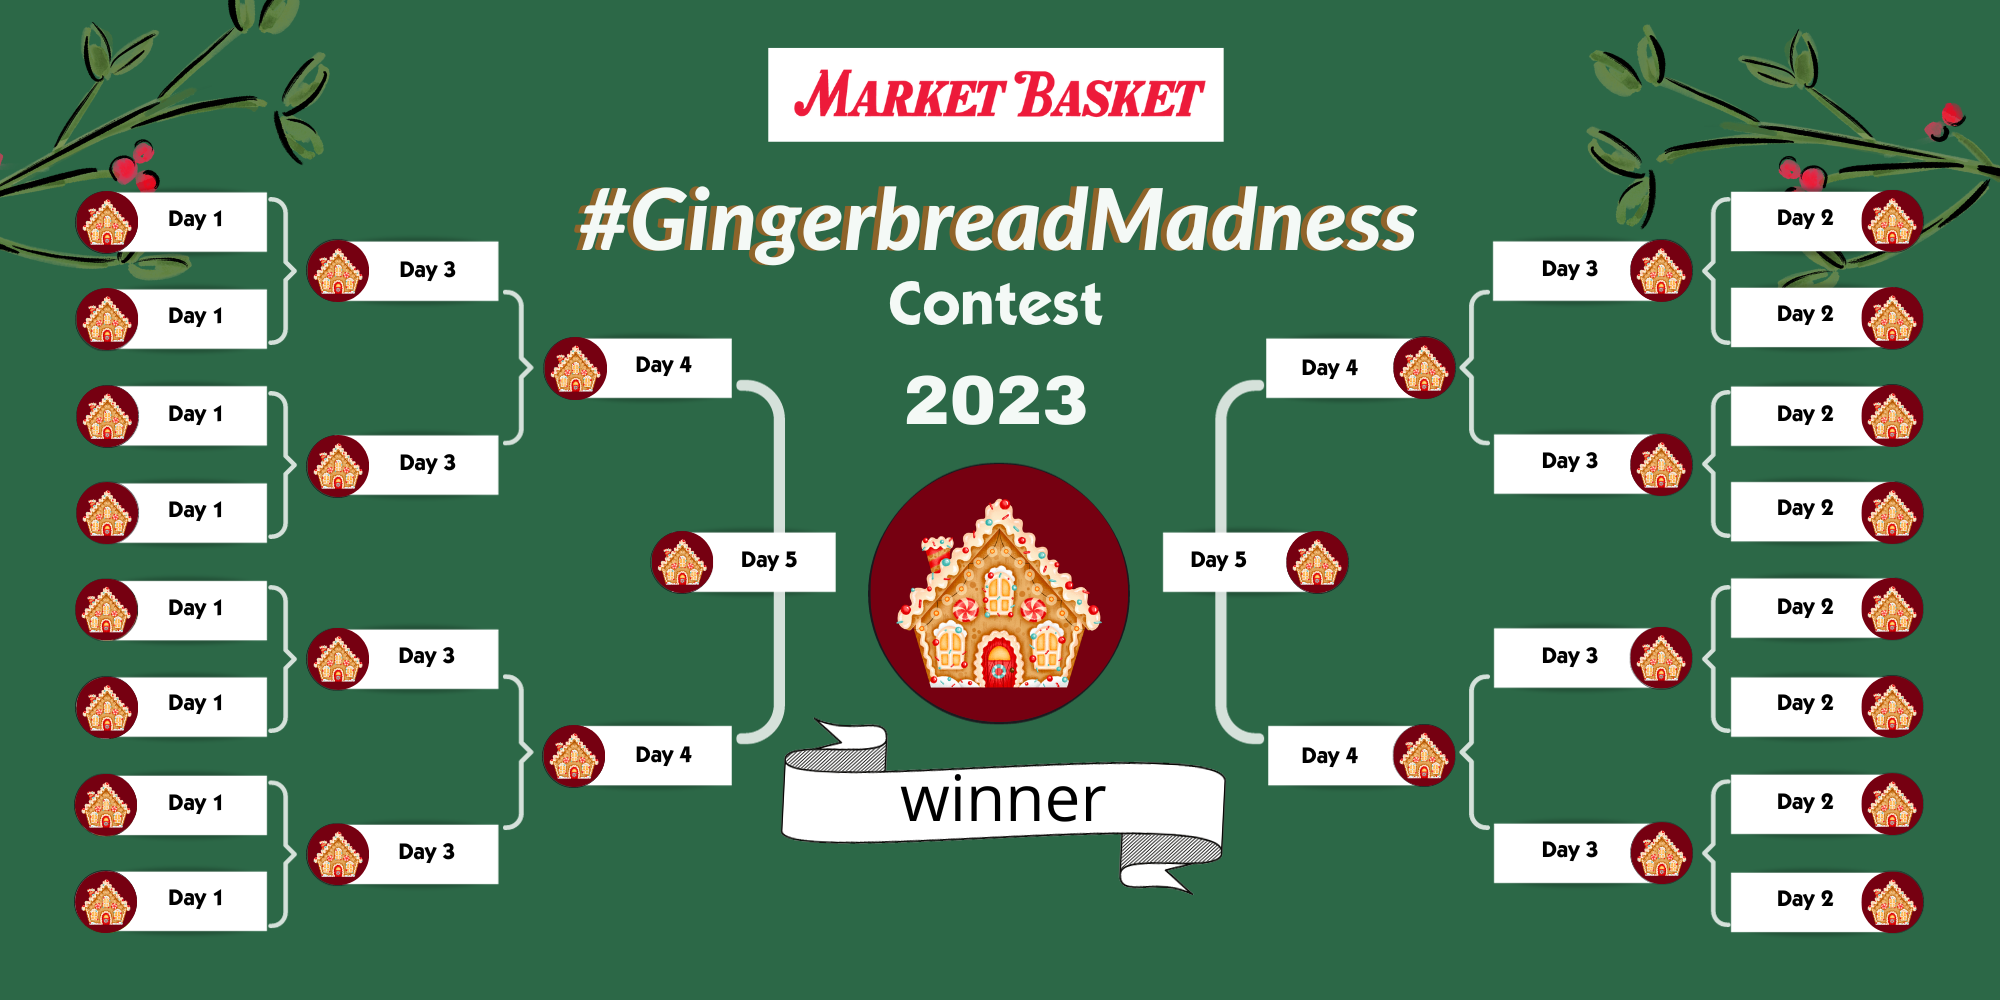 Gingerbread Madness Contest Bracket